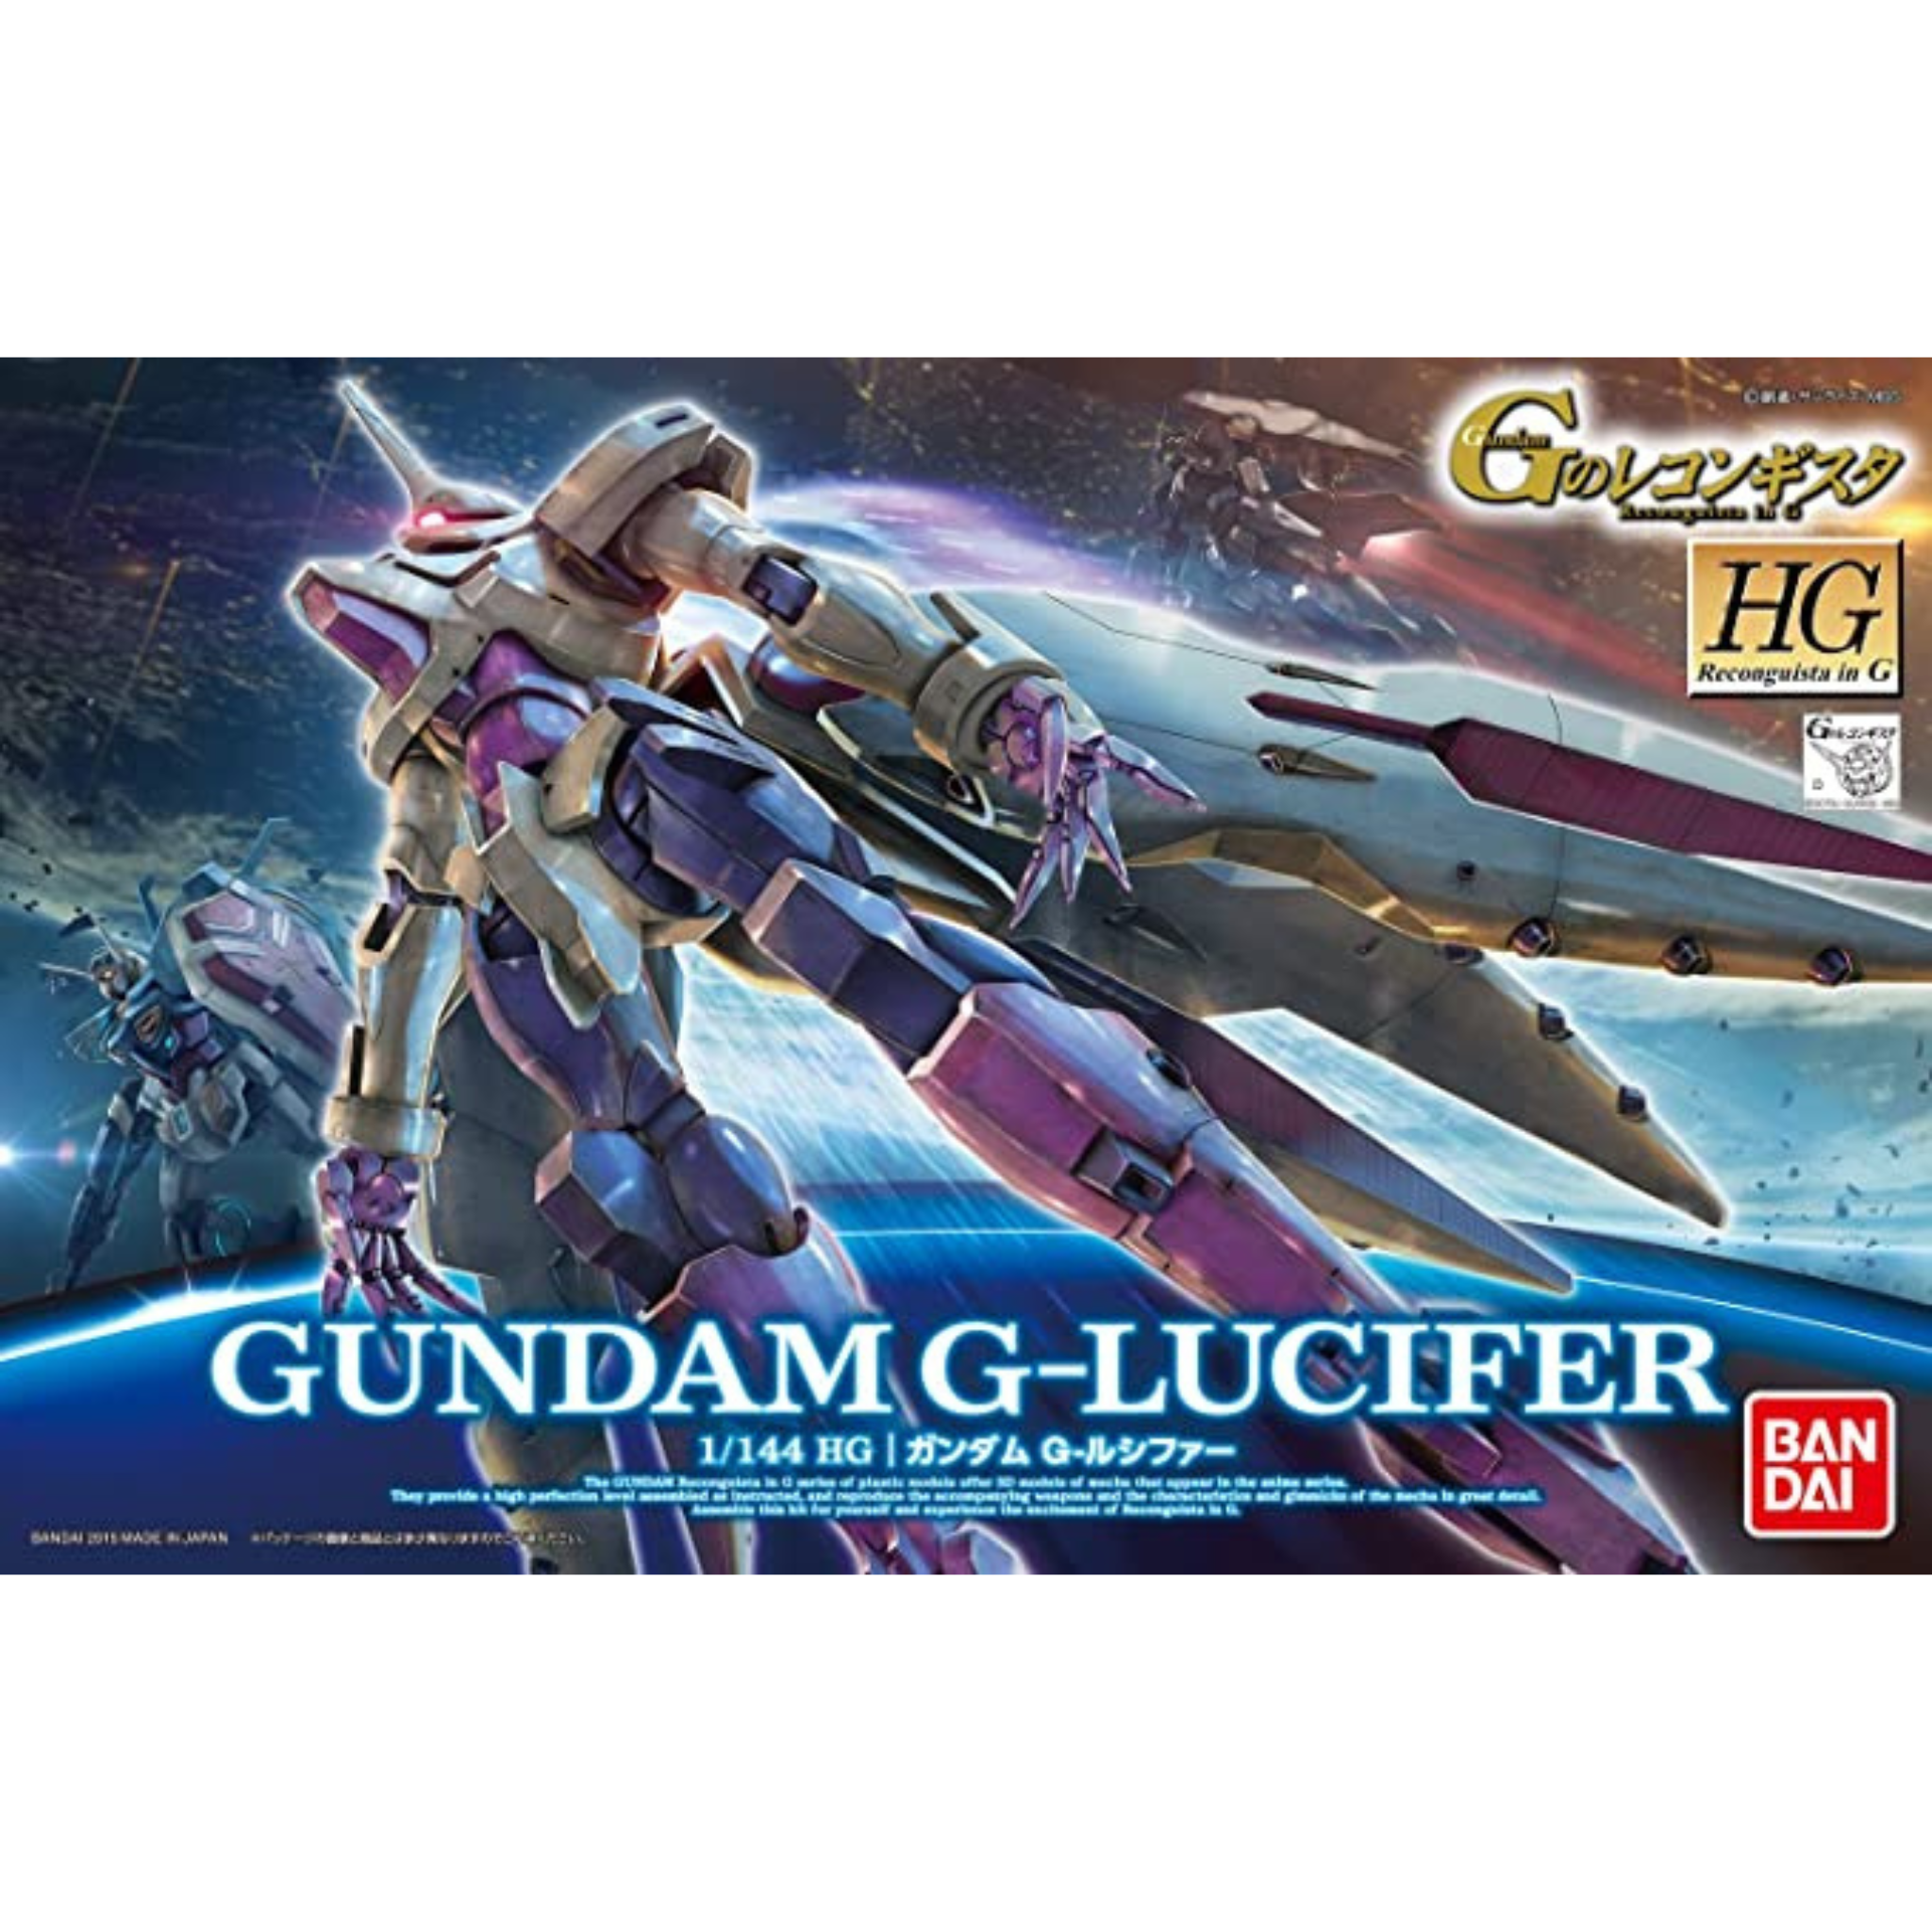 HG 1/144 Reconguista in G #11 G-Lucifer #195962 by Bandai